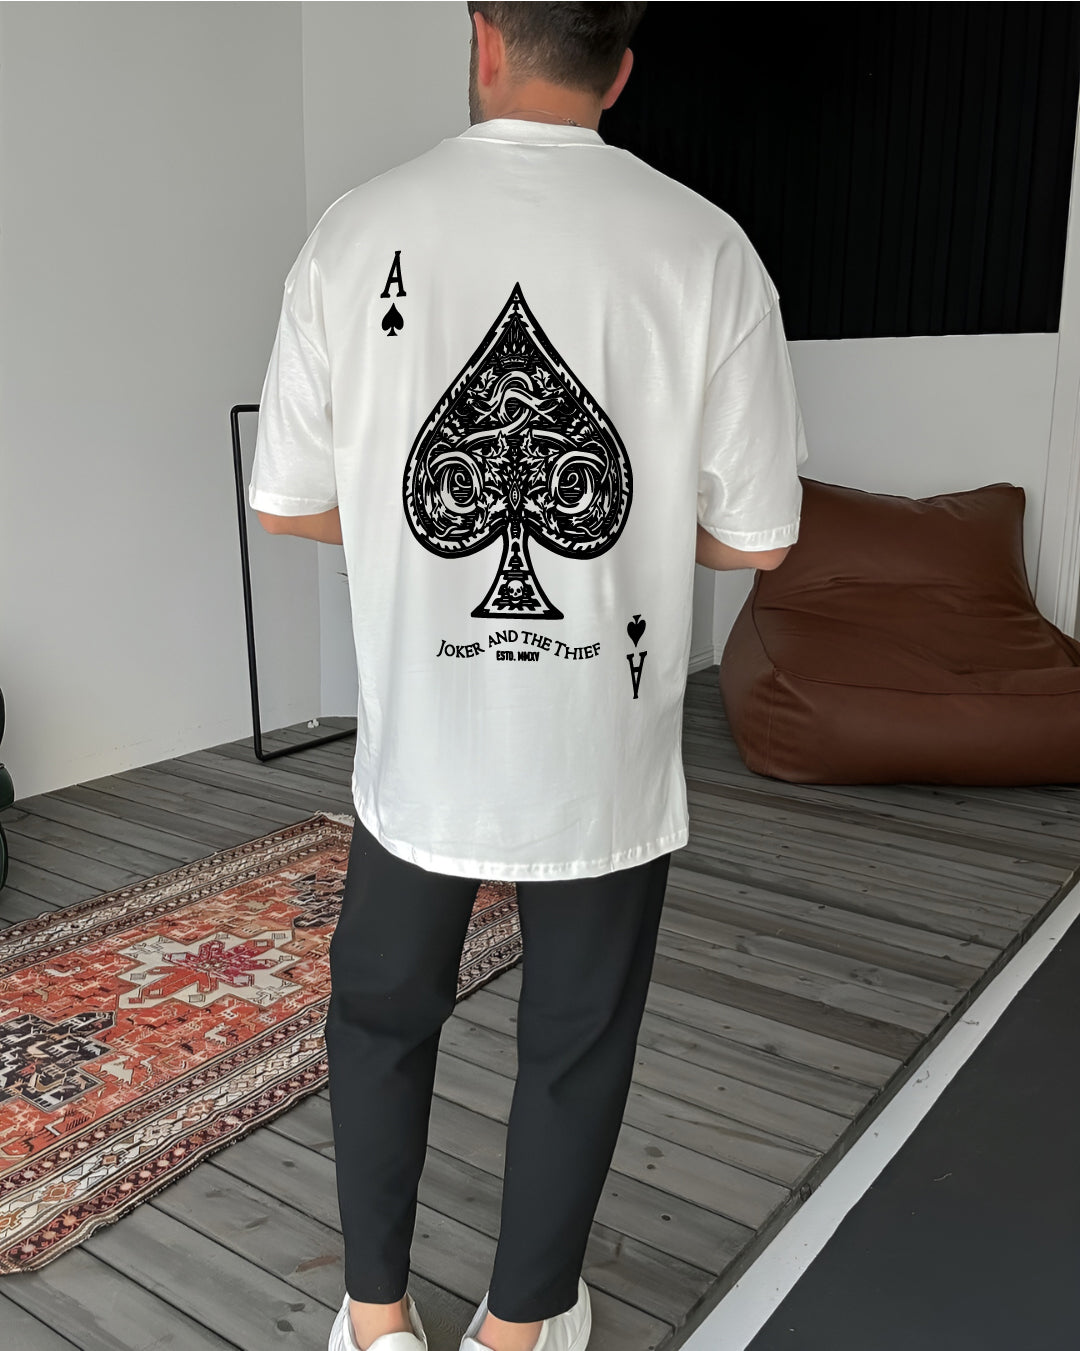 White "Ace" Printed Oversize T-Shirt